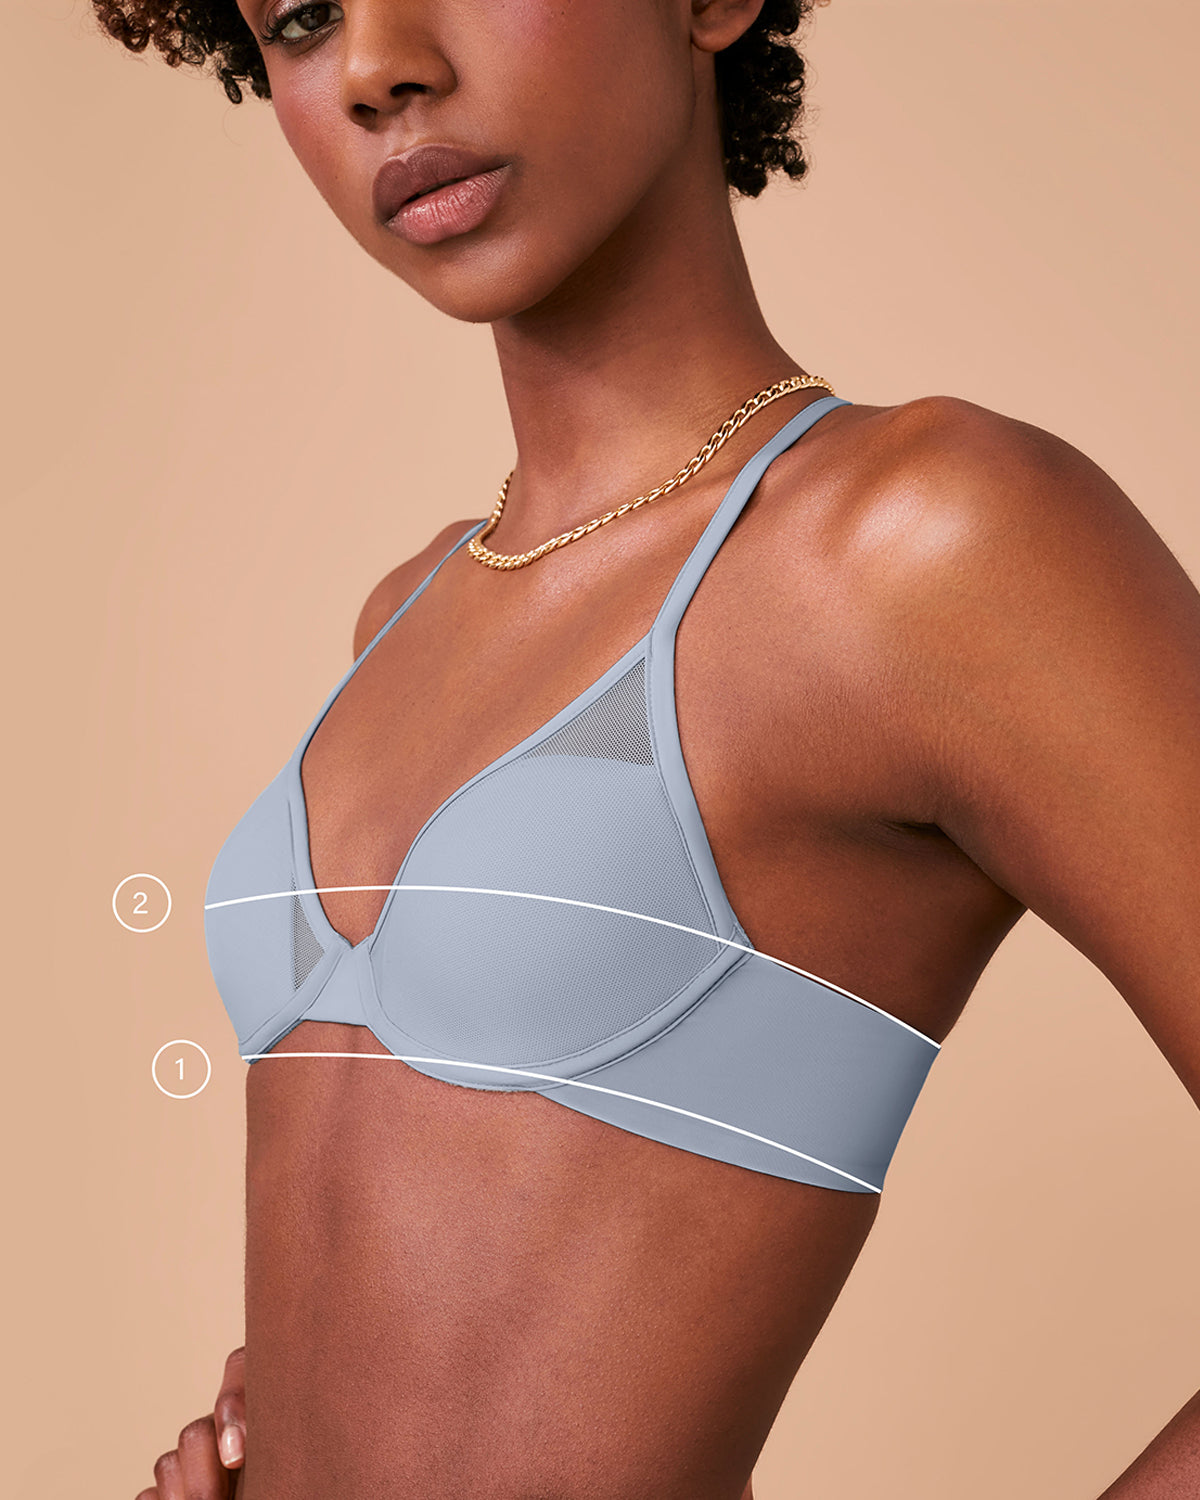 How to find your correct bra size, coming from a sports bra designer #